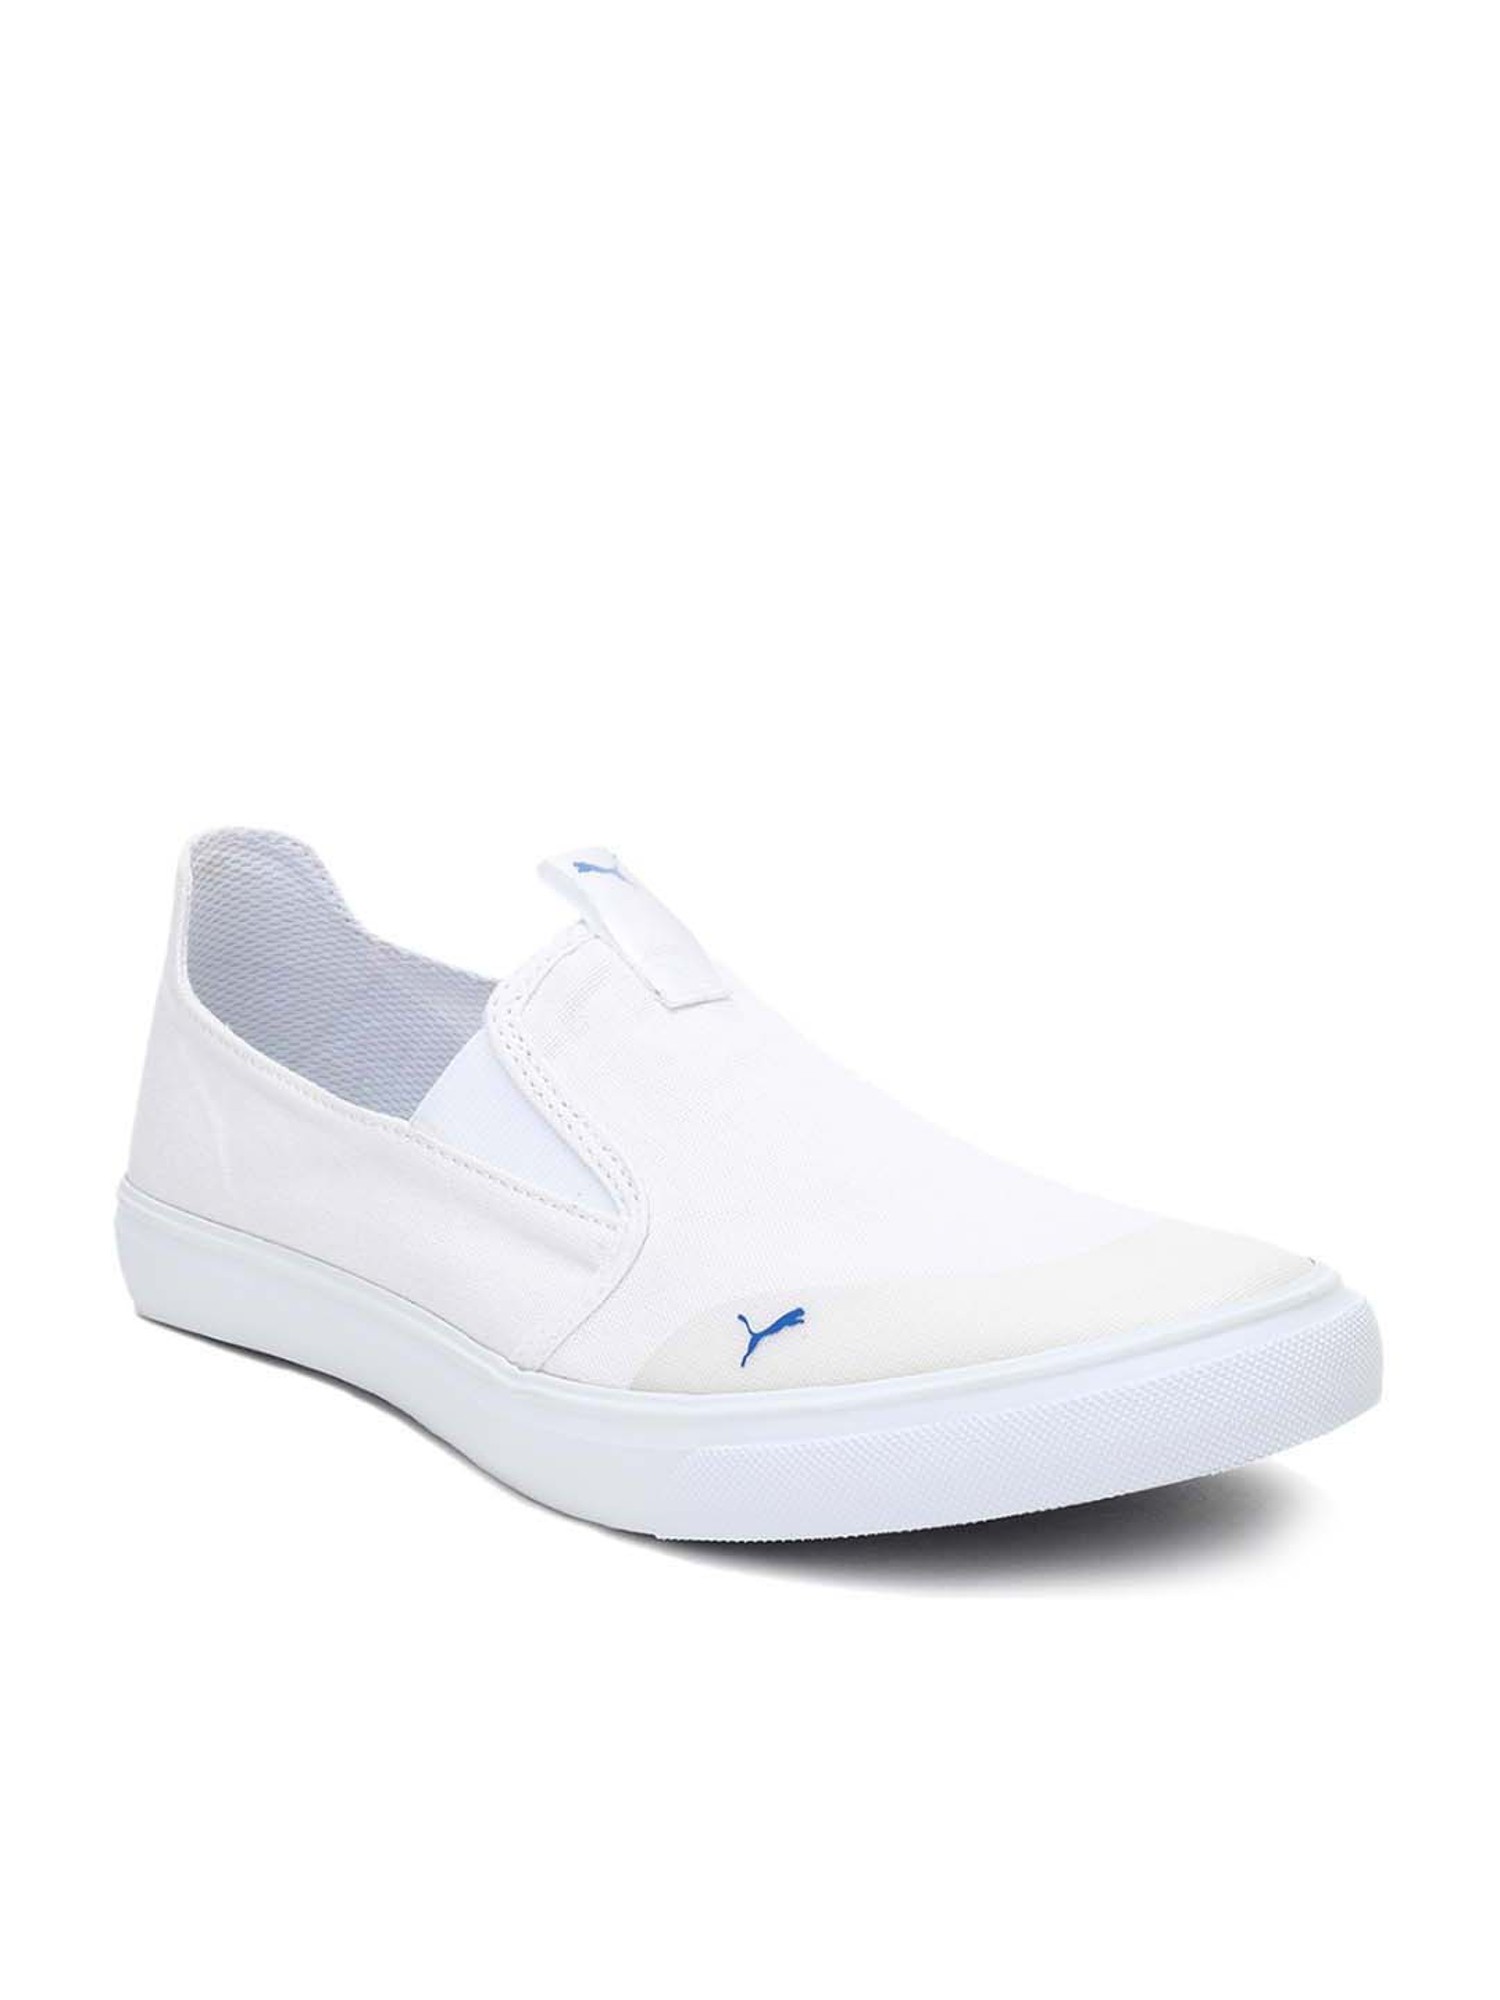 Buy Lazy Slip On Ii Dp Blue Sneakers - Casual Shoes for Unisex 7172681 |  Myntra